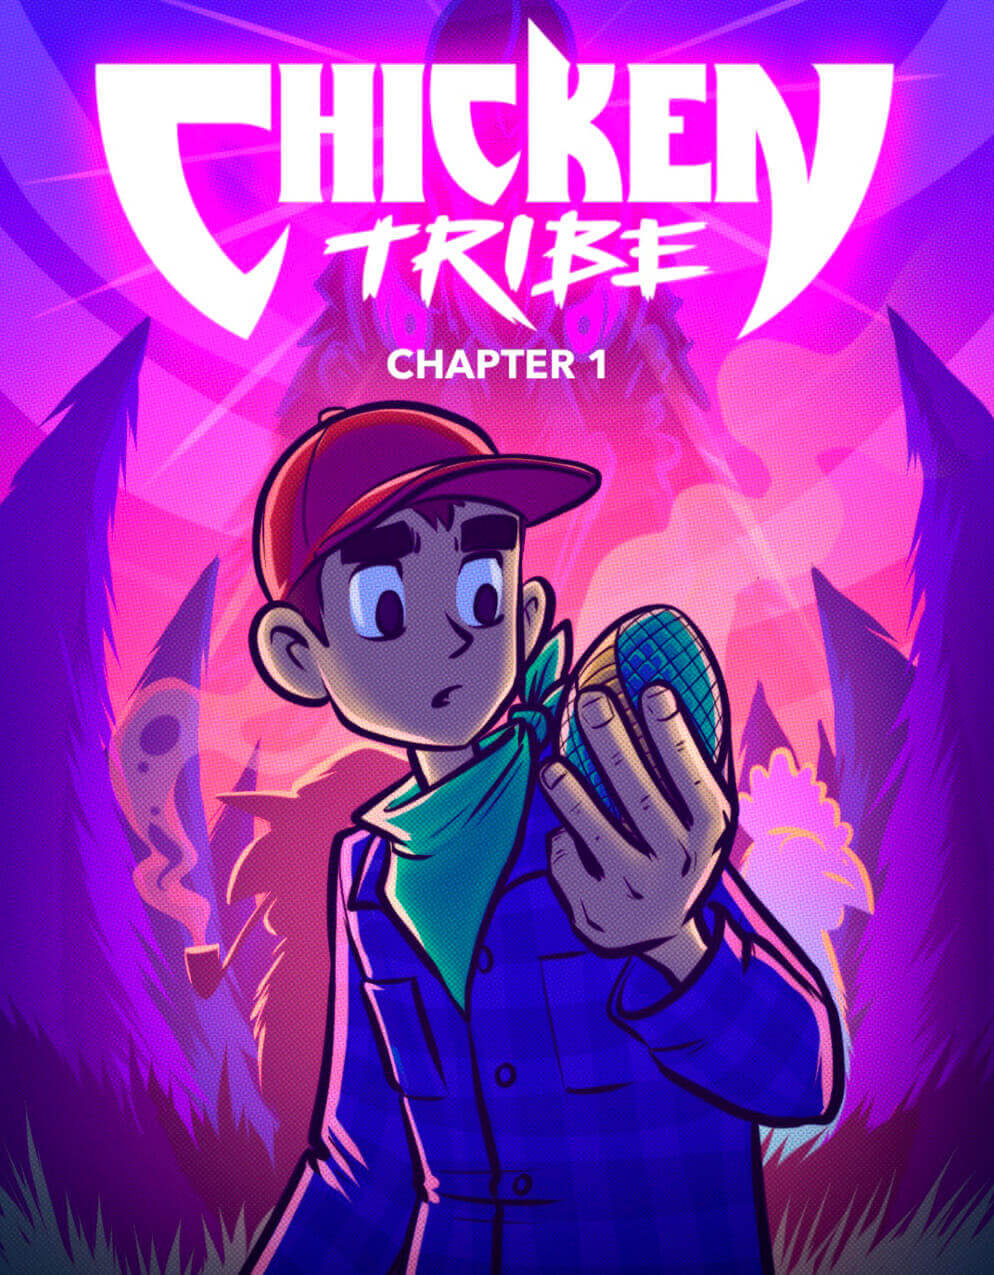 Chapter 1 cover art